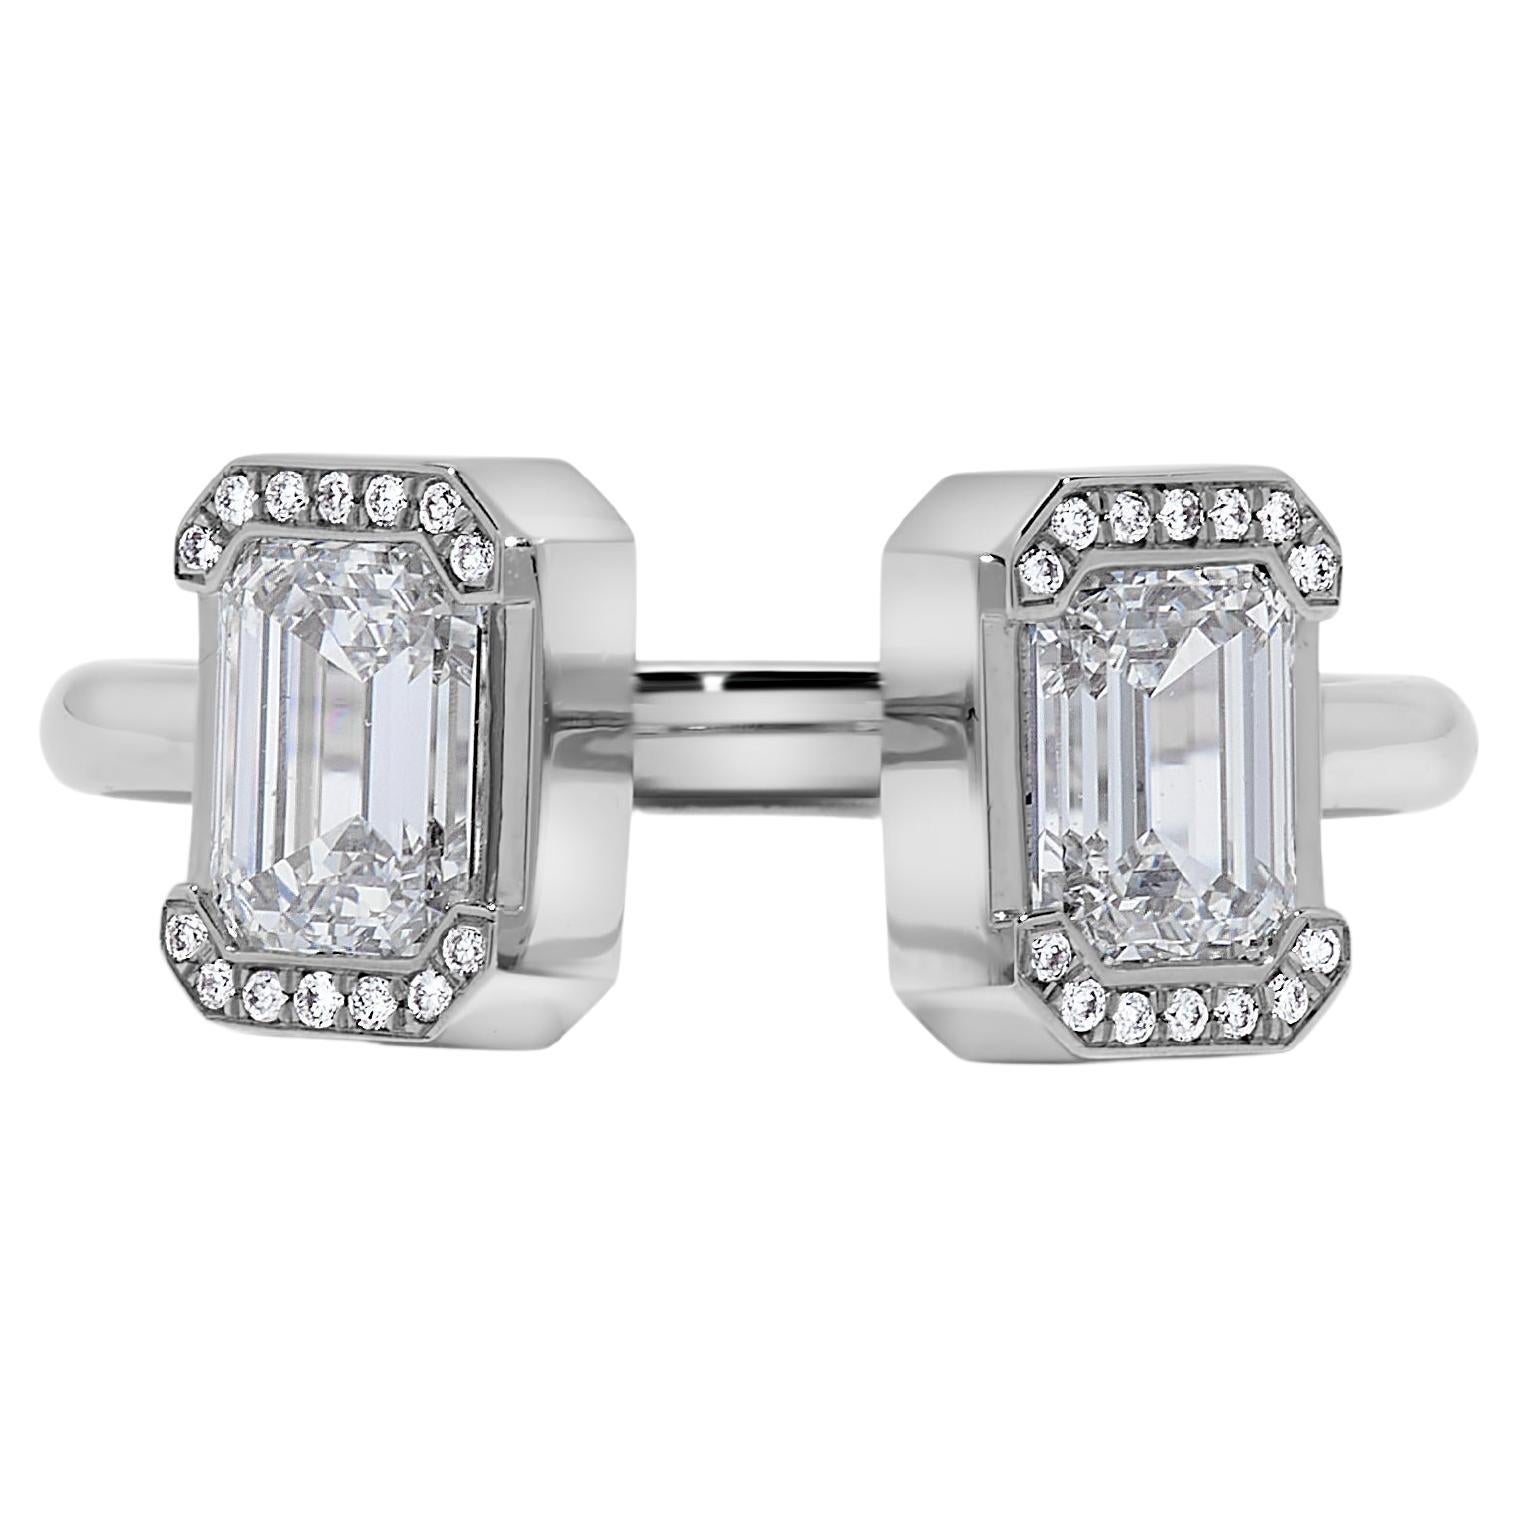 This two stone ring features two GIA certified diamonds weighing 0.70 and 0.71 carats both D VVS2 with 0.05 melees set in Platinum. Size 6. Resizable upon request. 